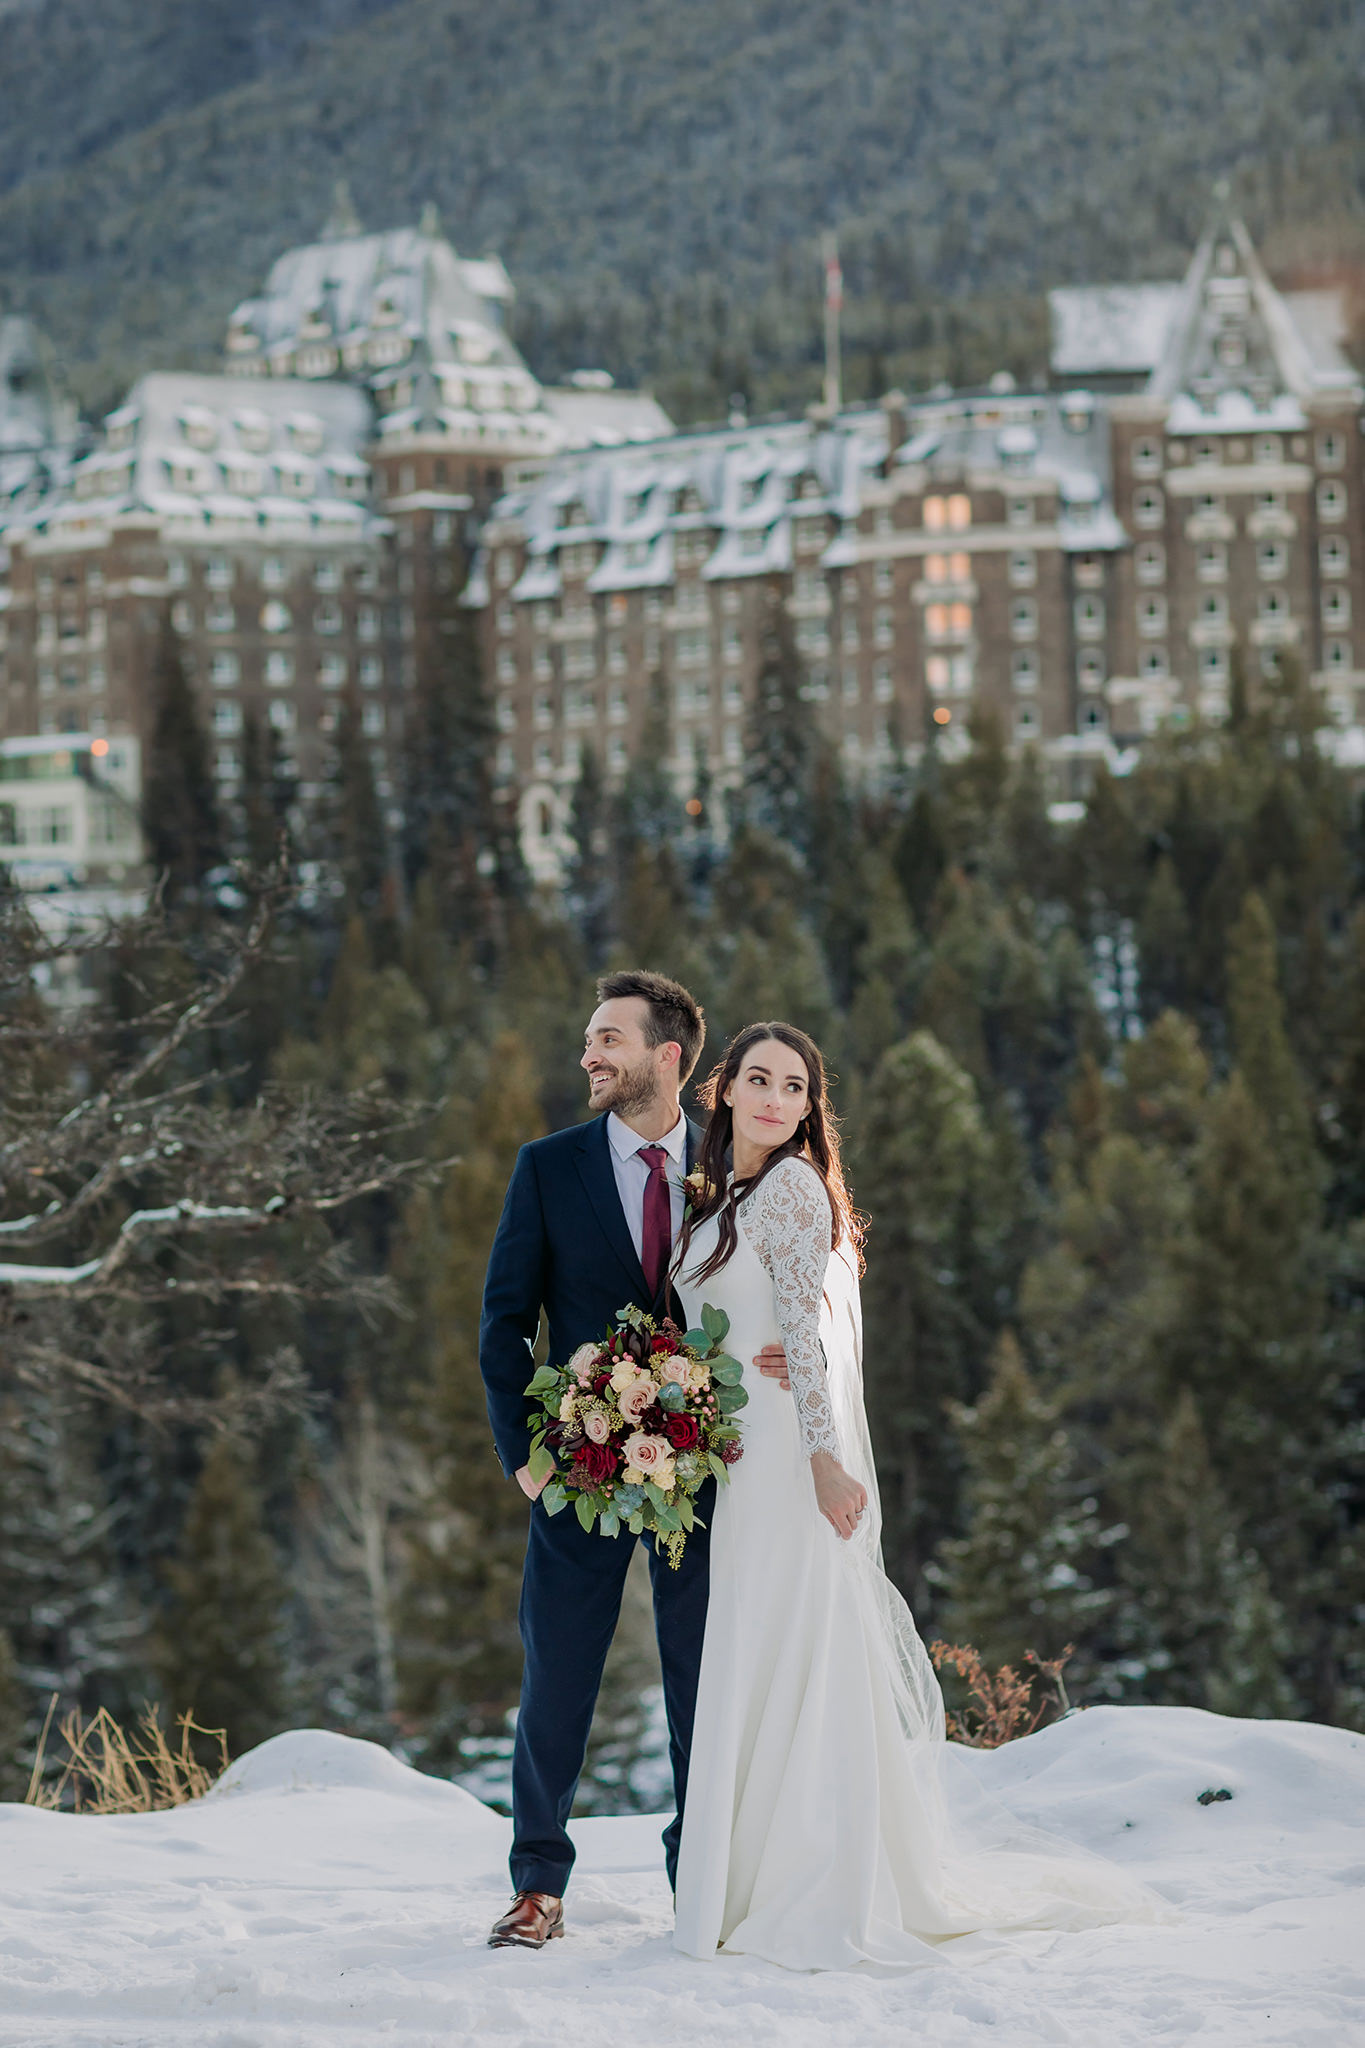 Banff winter wedding portraits at Surprise Corner in the mountains with Fairmont Banff Springs in the distance